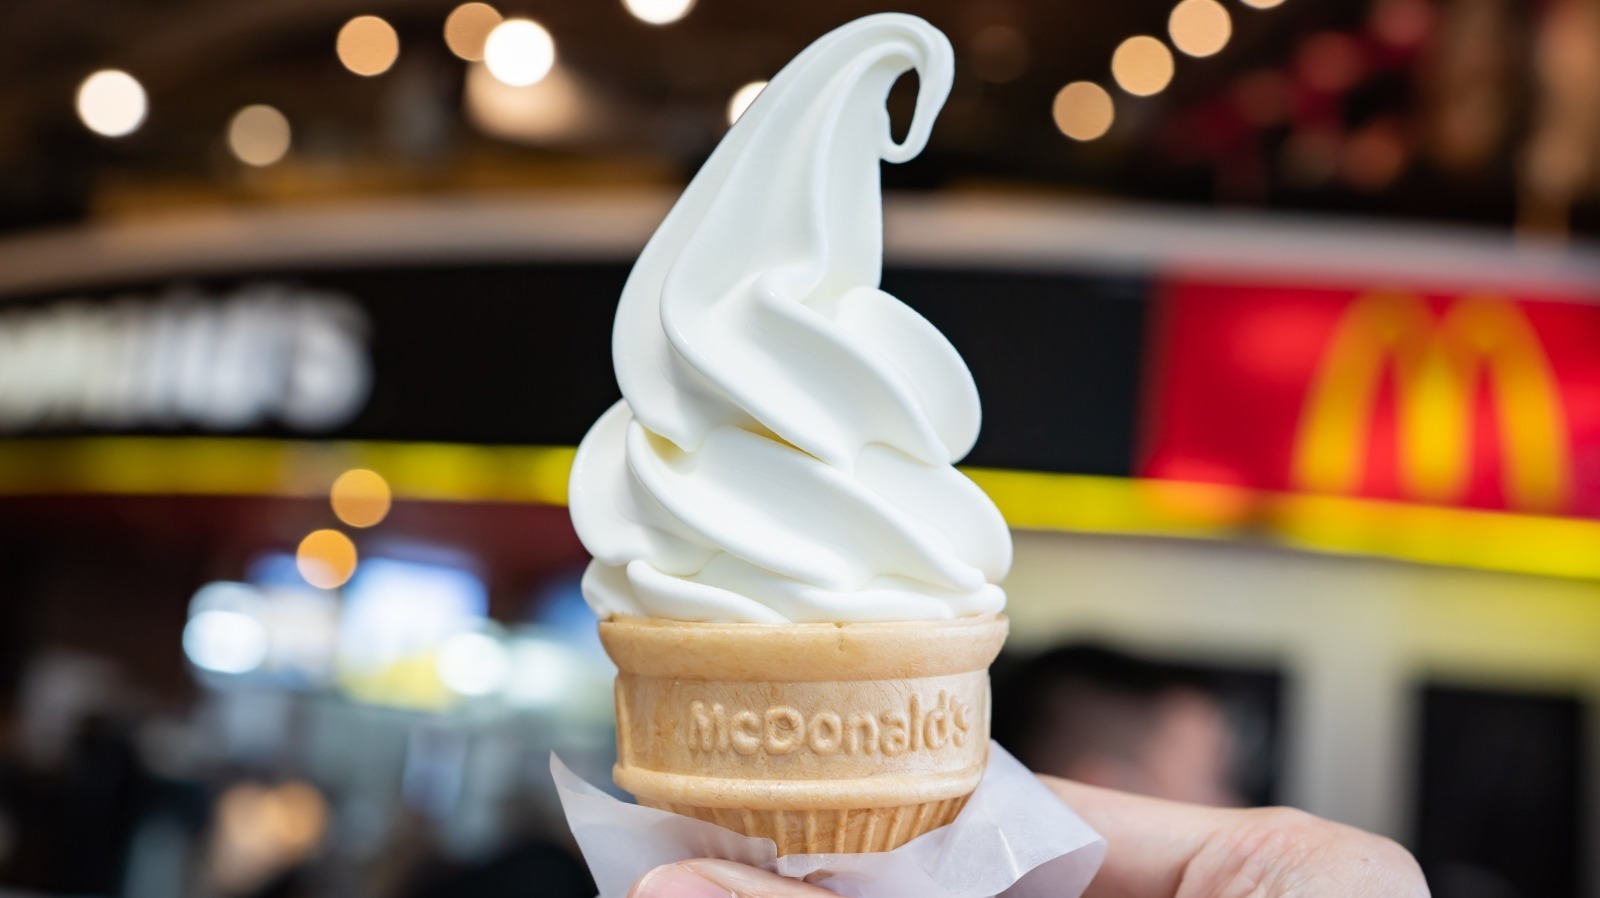 What Ingredient Rumors About McDonald's Ice Cream Could Mean